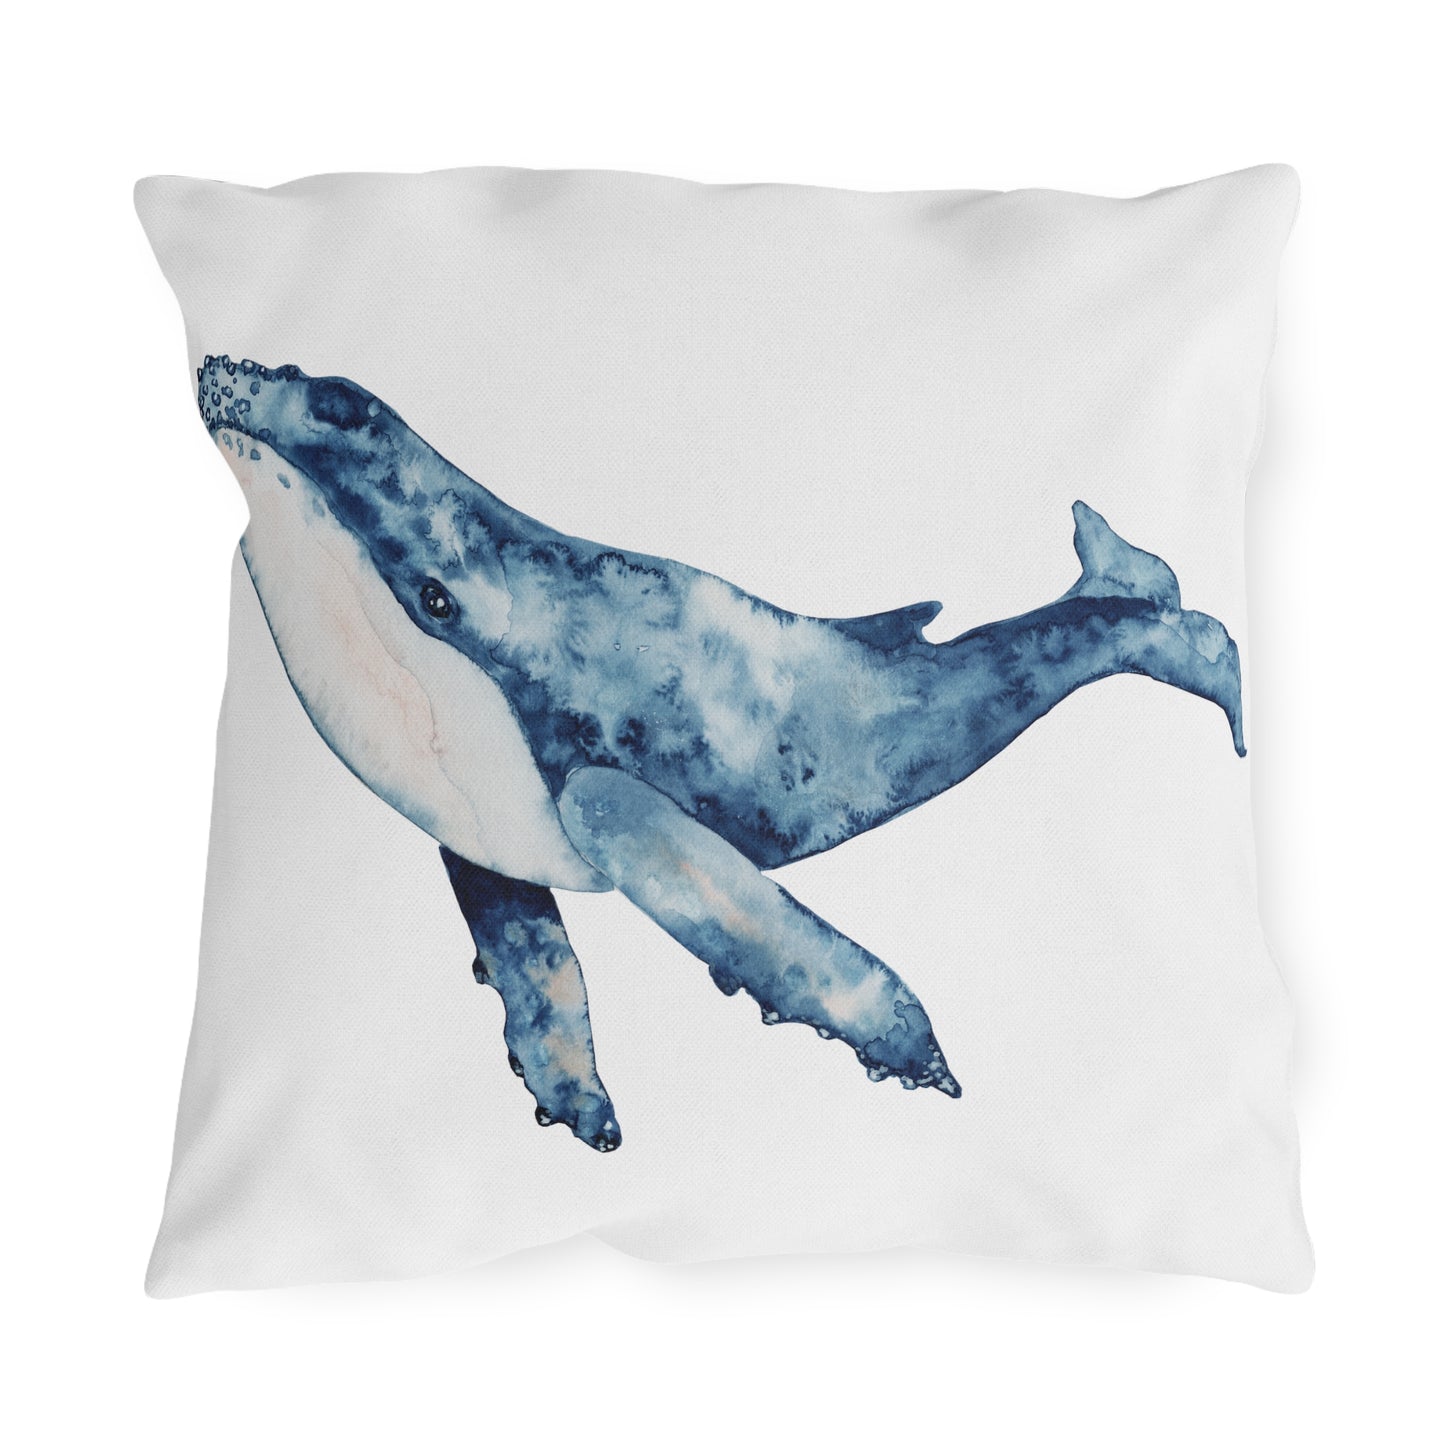 Whale Outdoor Pillow Watercolor Fish Lovers Coastal Beach Home Gift